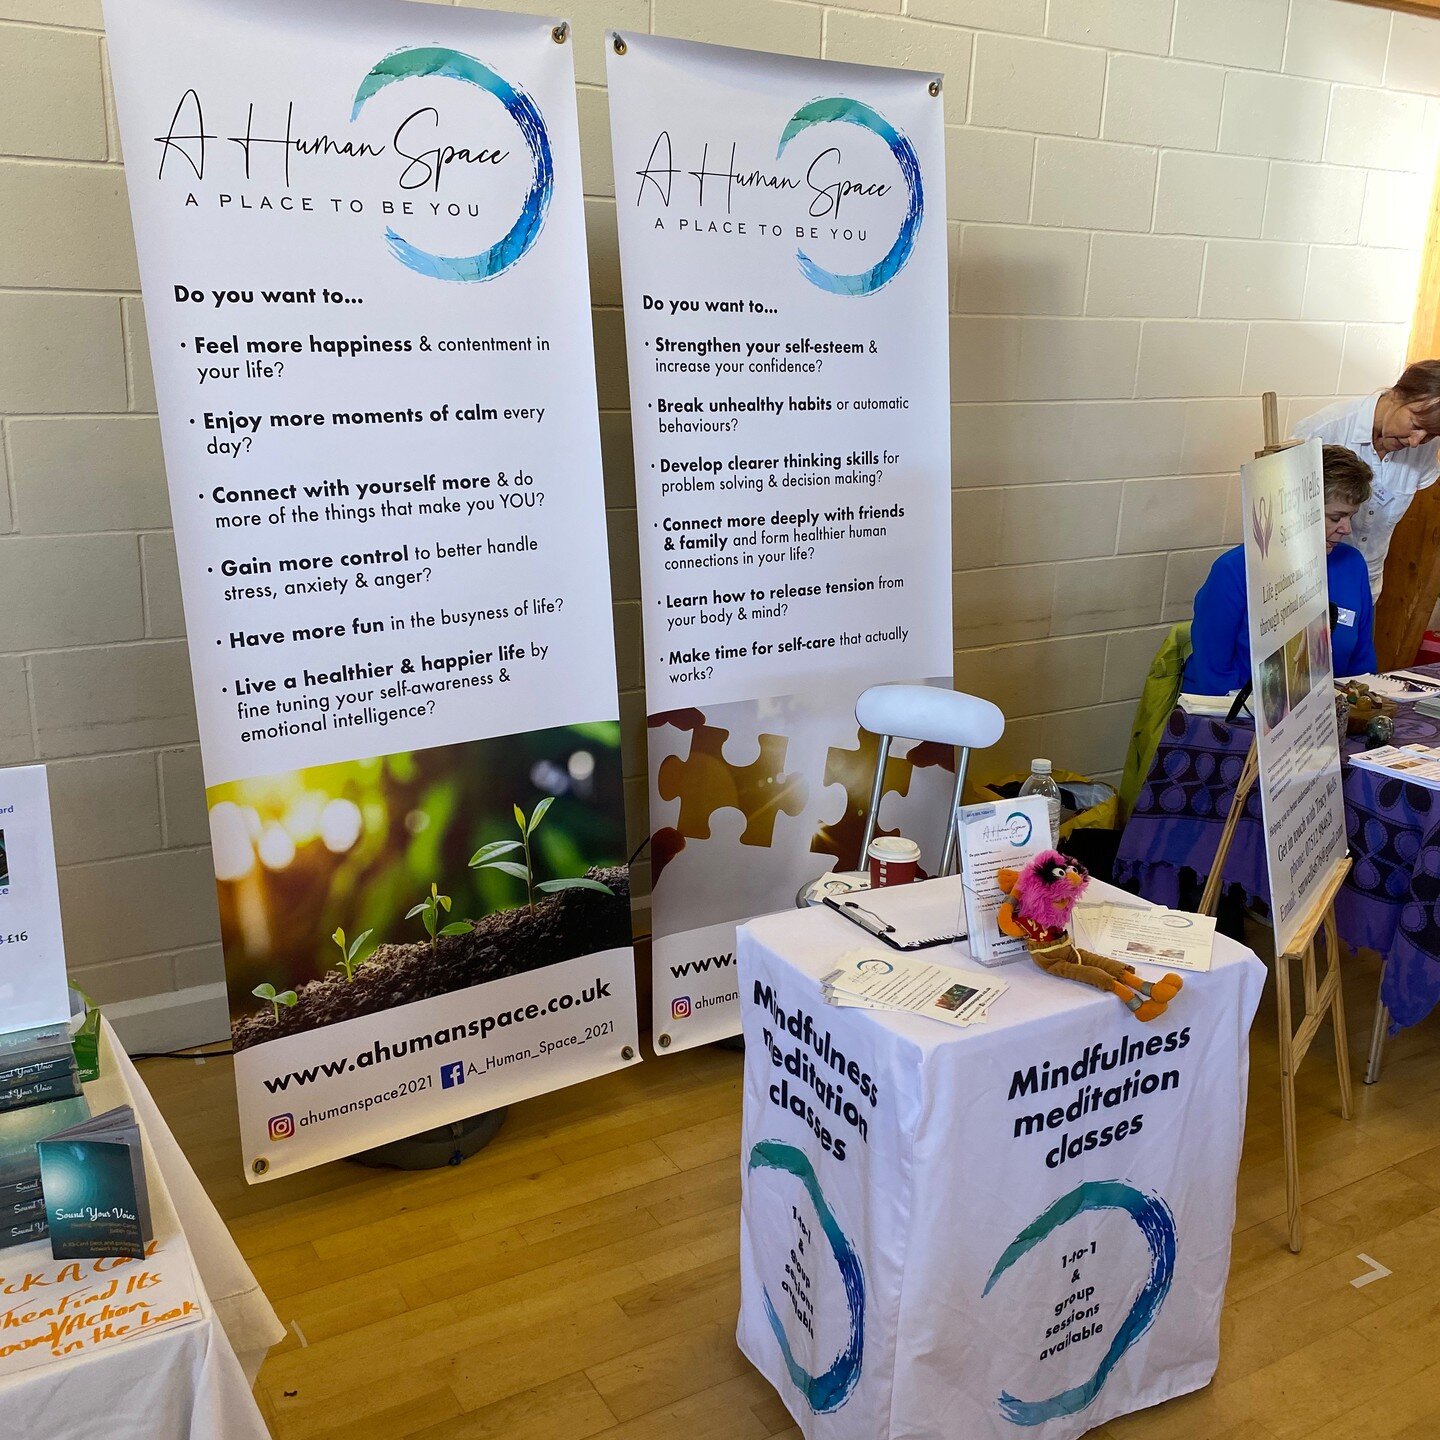 &hellip;A good weekend at the Colchester LifeArts MBS wellbeing Festival.

As always, It was lovely to meet &amp; speak to all the visitors who engaged with me at my stand, many positive connections were made this weekend and I am looking forward to 